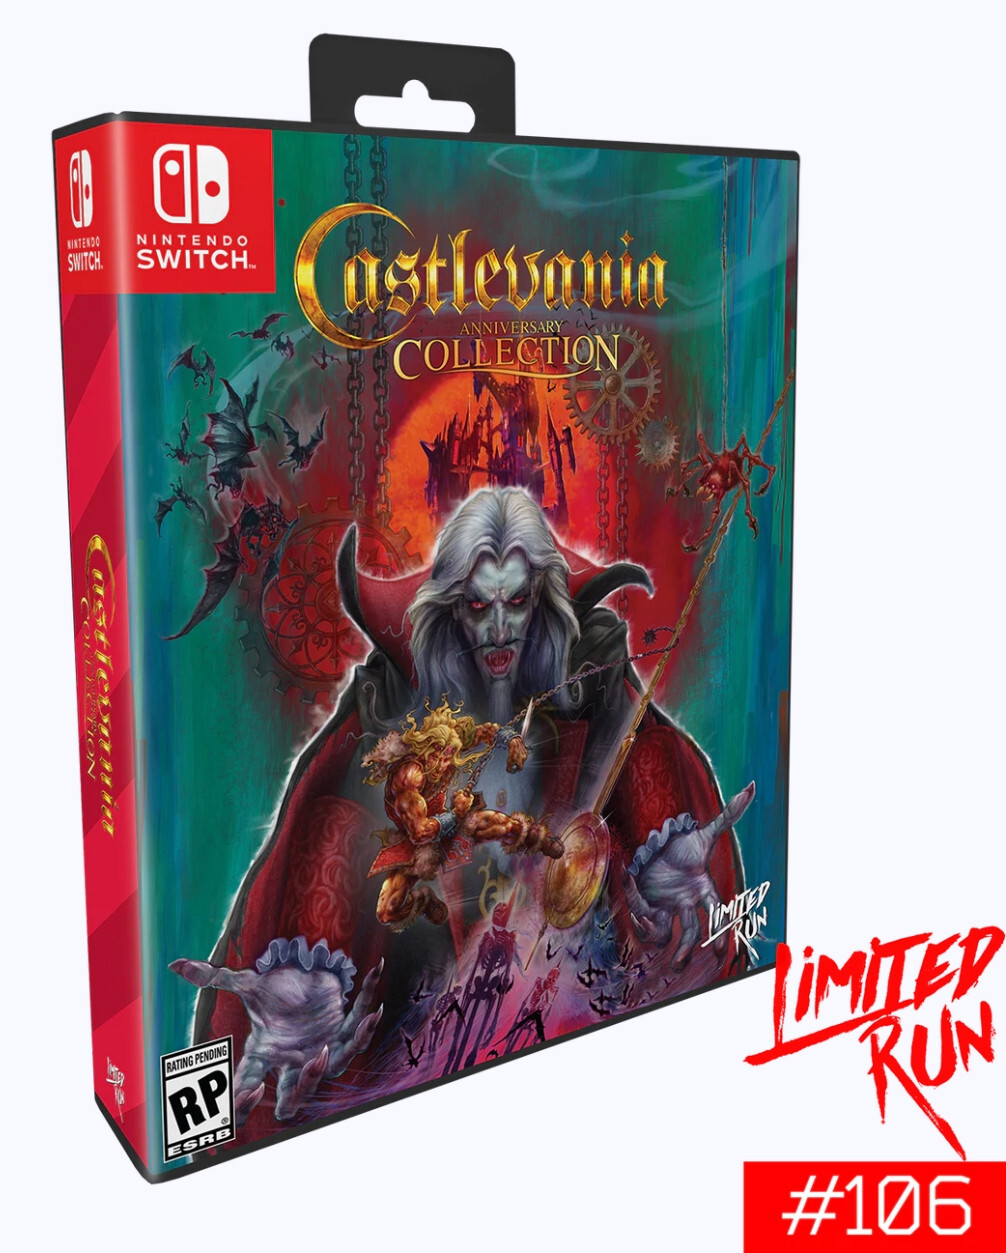 Limited Run Castlevania - Anniversary Collection Bloodlines Edition Games) Nintendo Switch